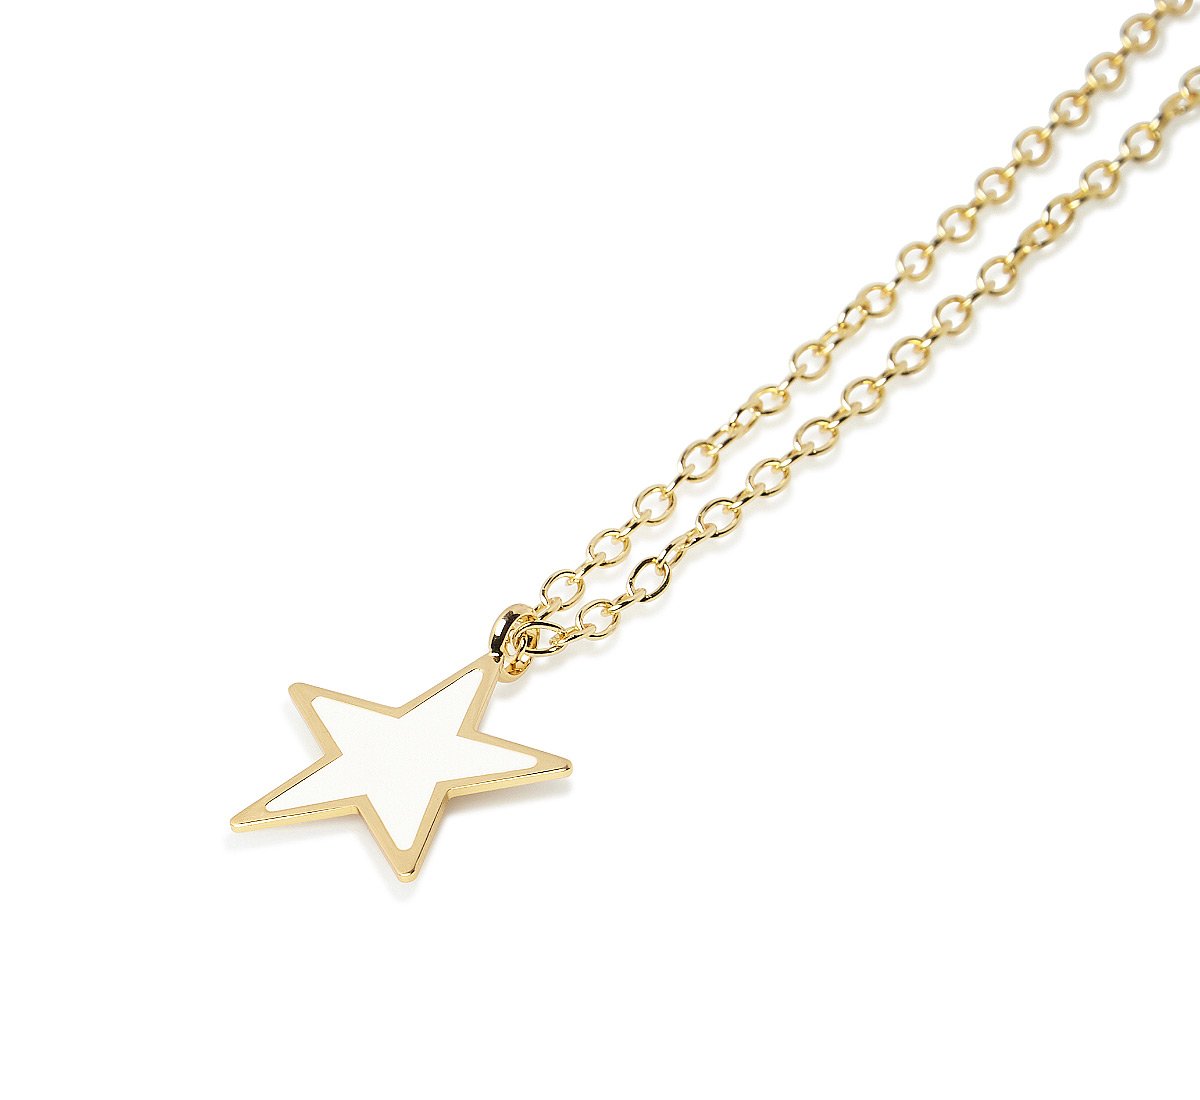 SMALL STAR PENDANT NECKLACE